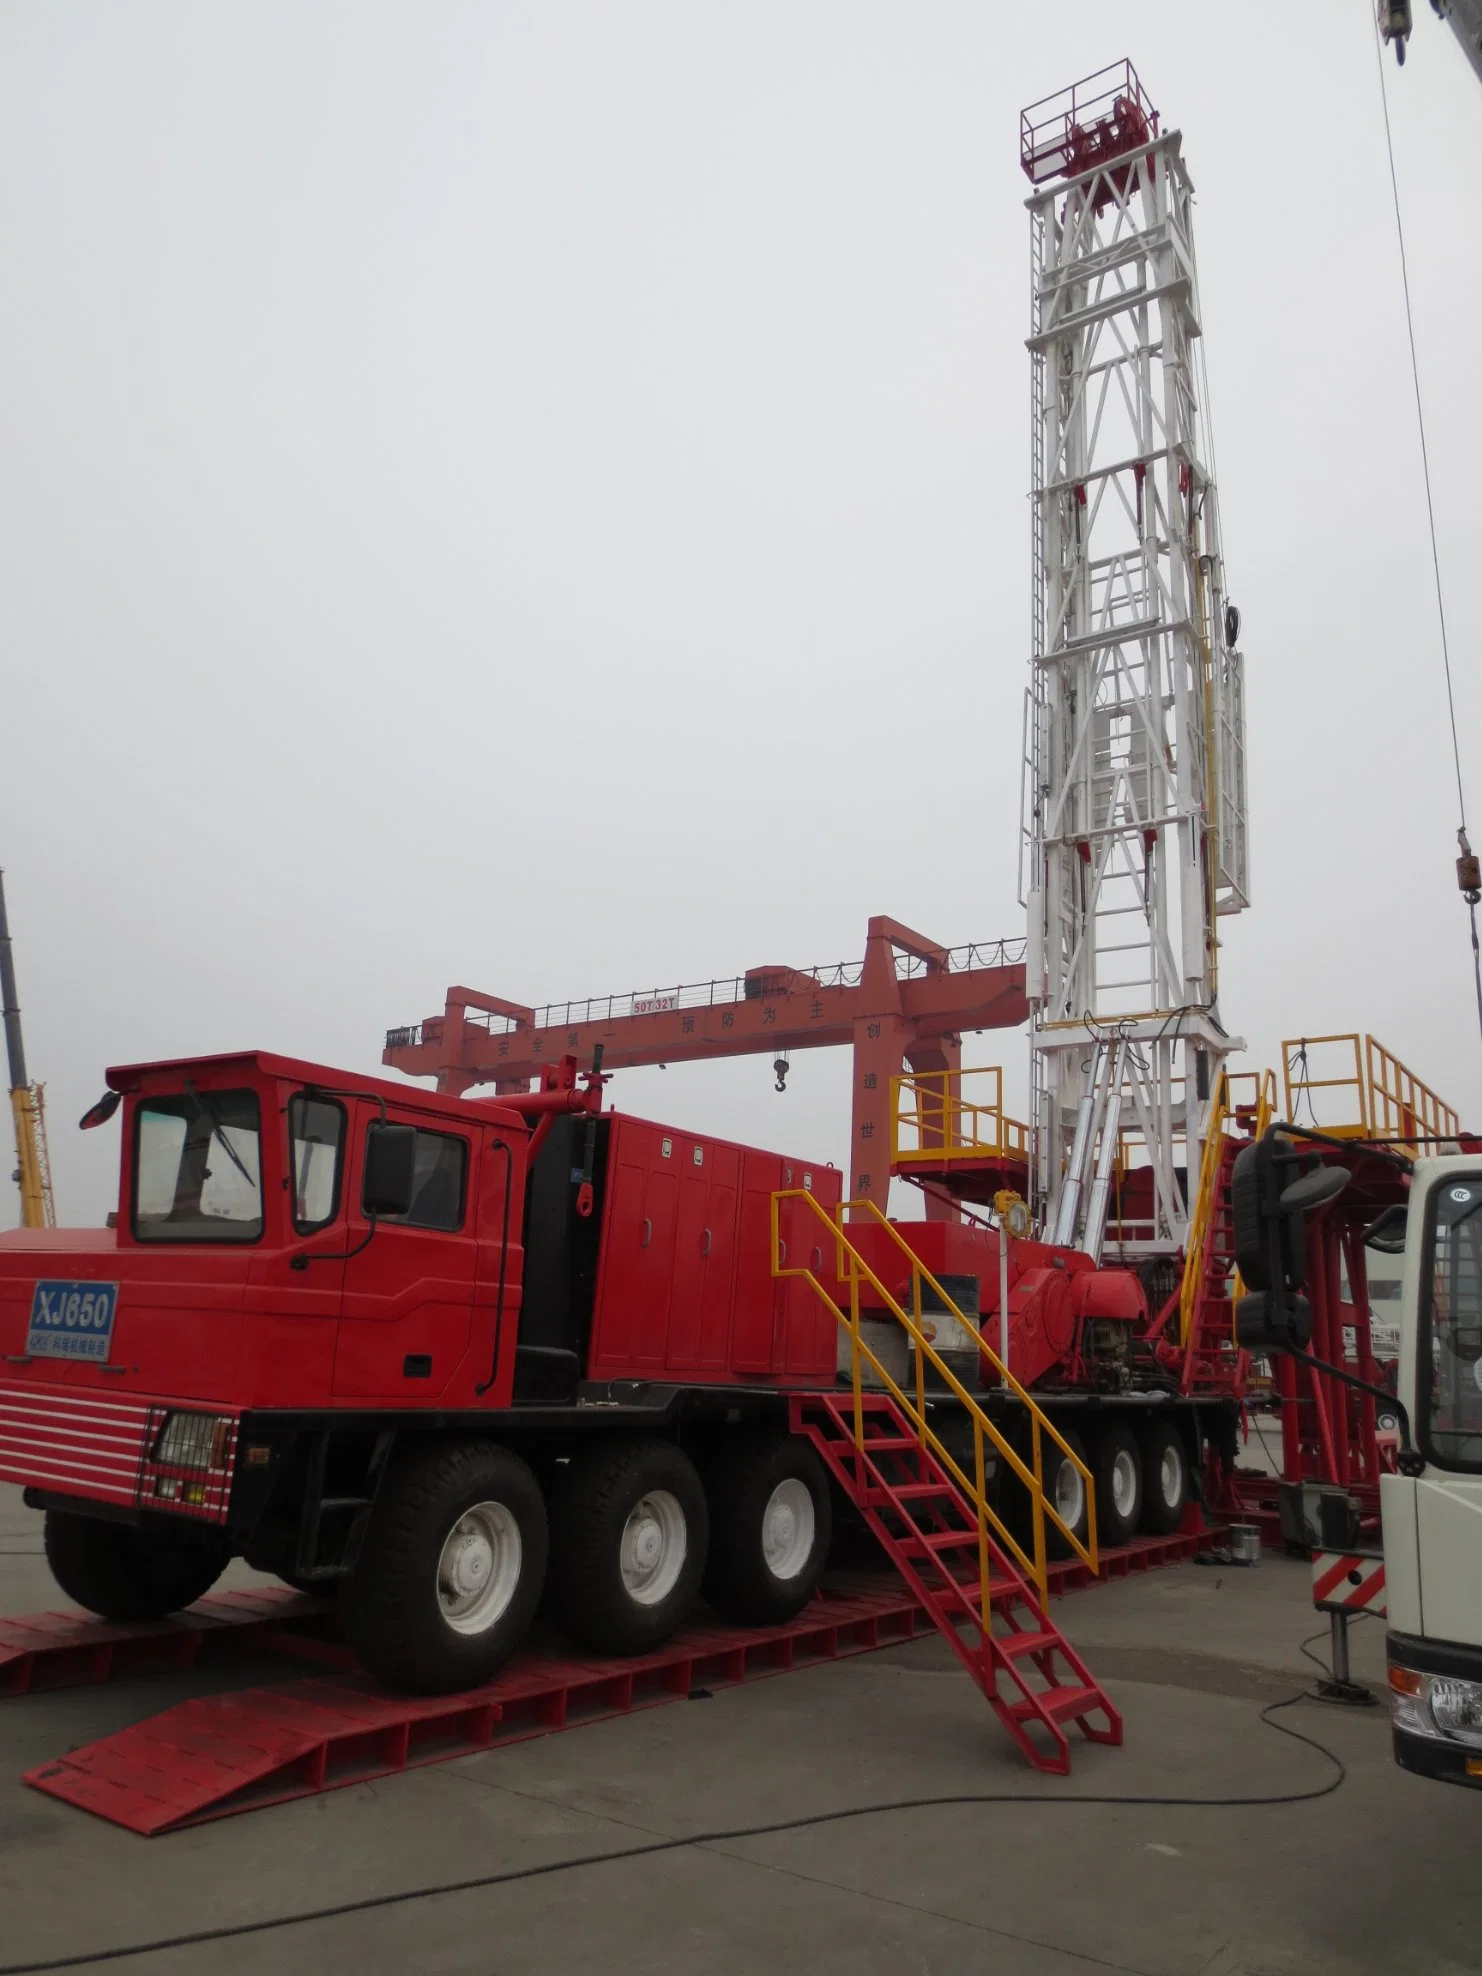 Truck-Mounted Drilling and Workover Rig 350HP/900kn Oil Well 200000/900 Provided 17-1/2"/440.5 350/257 385/287 Actual Height API